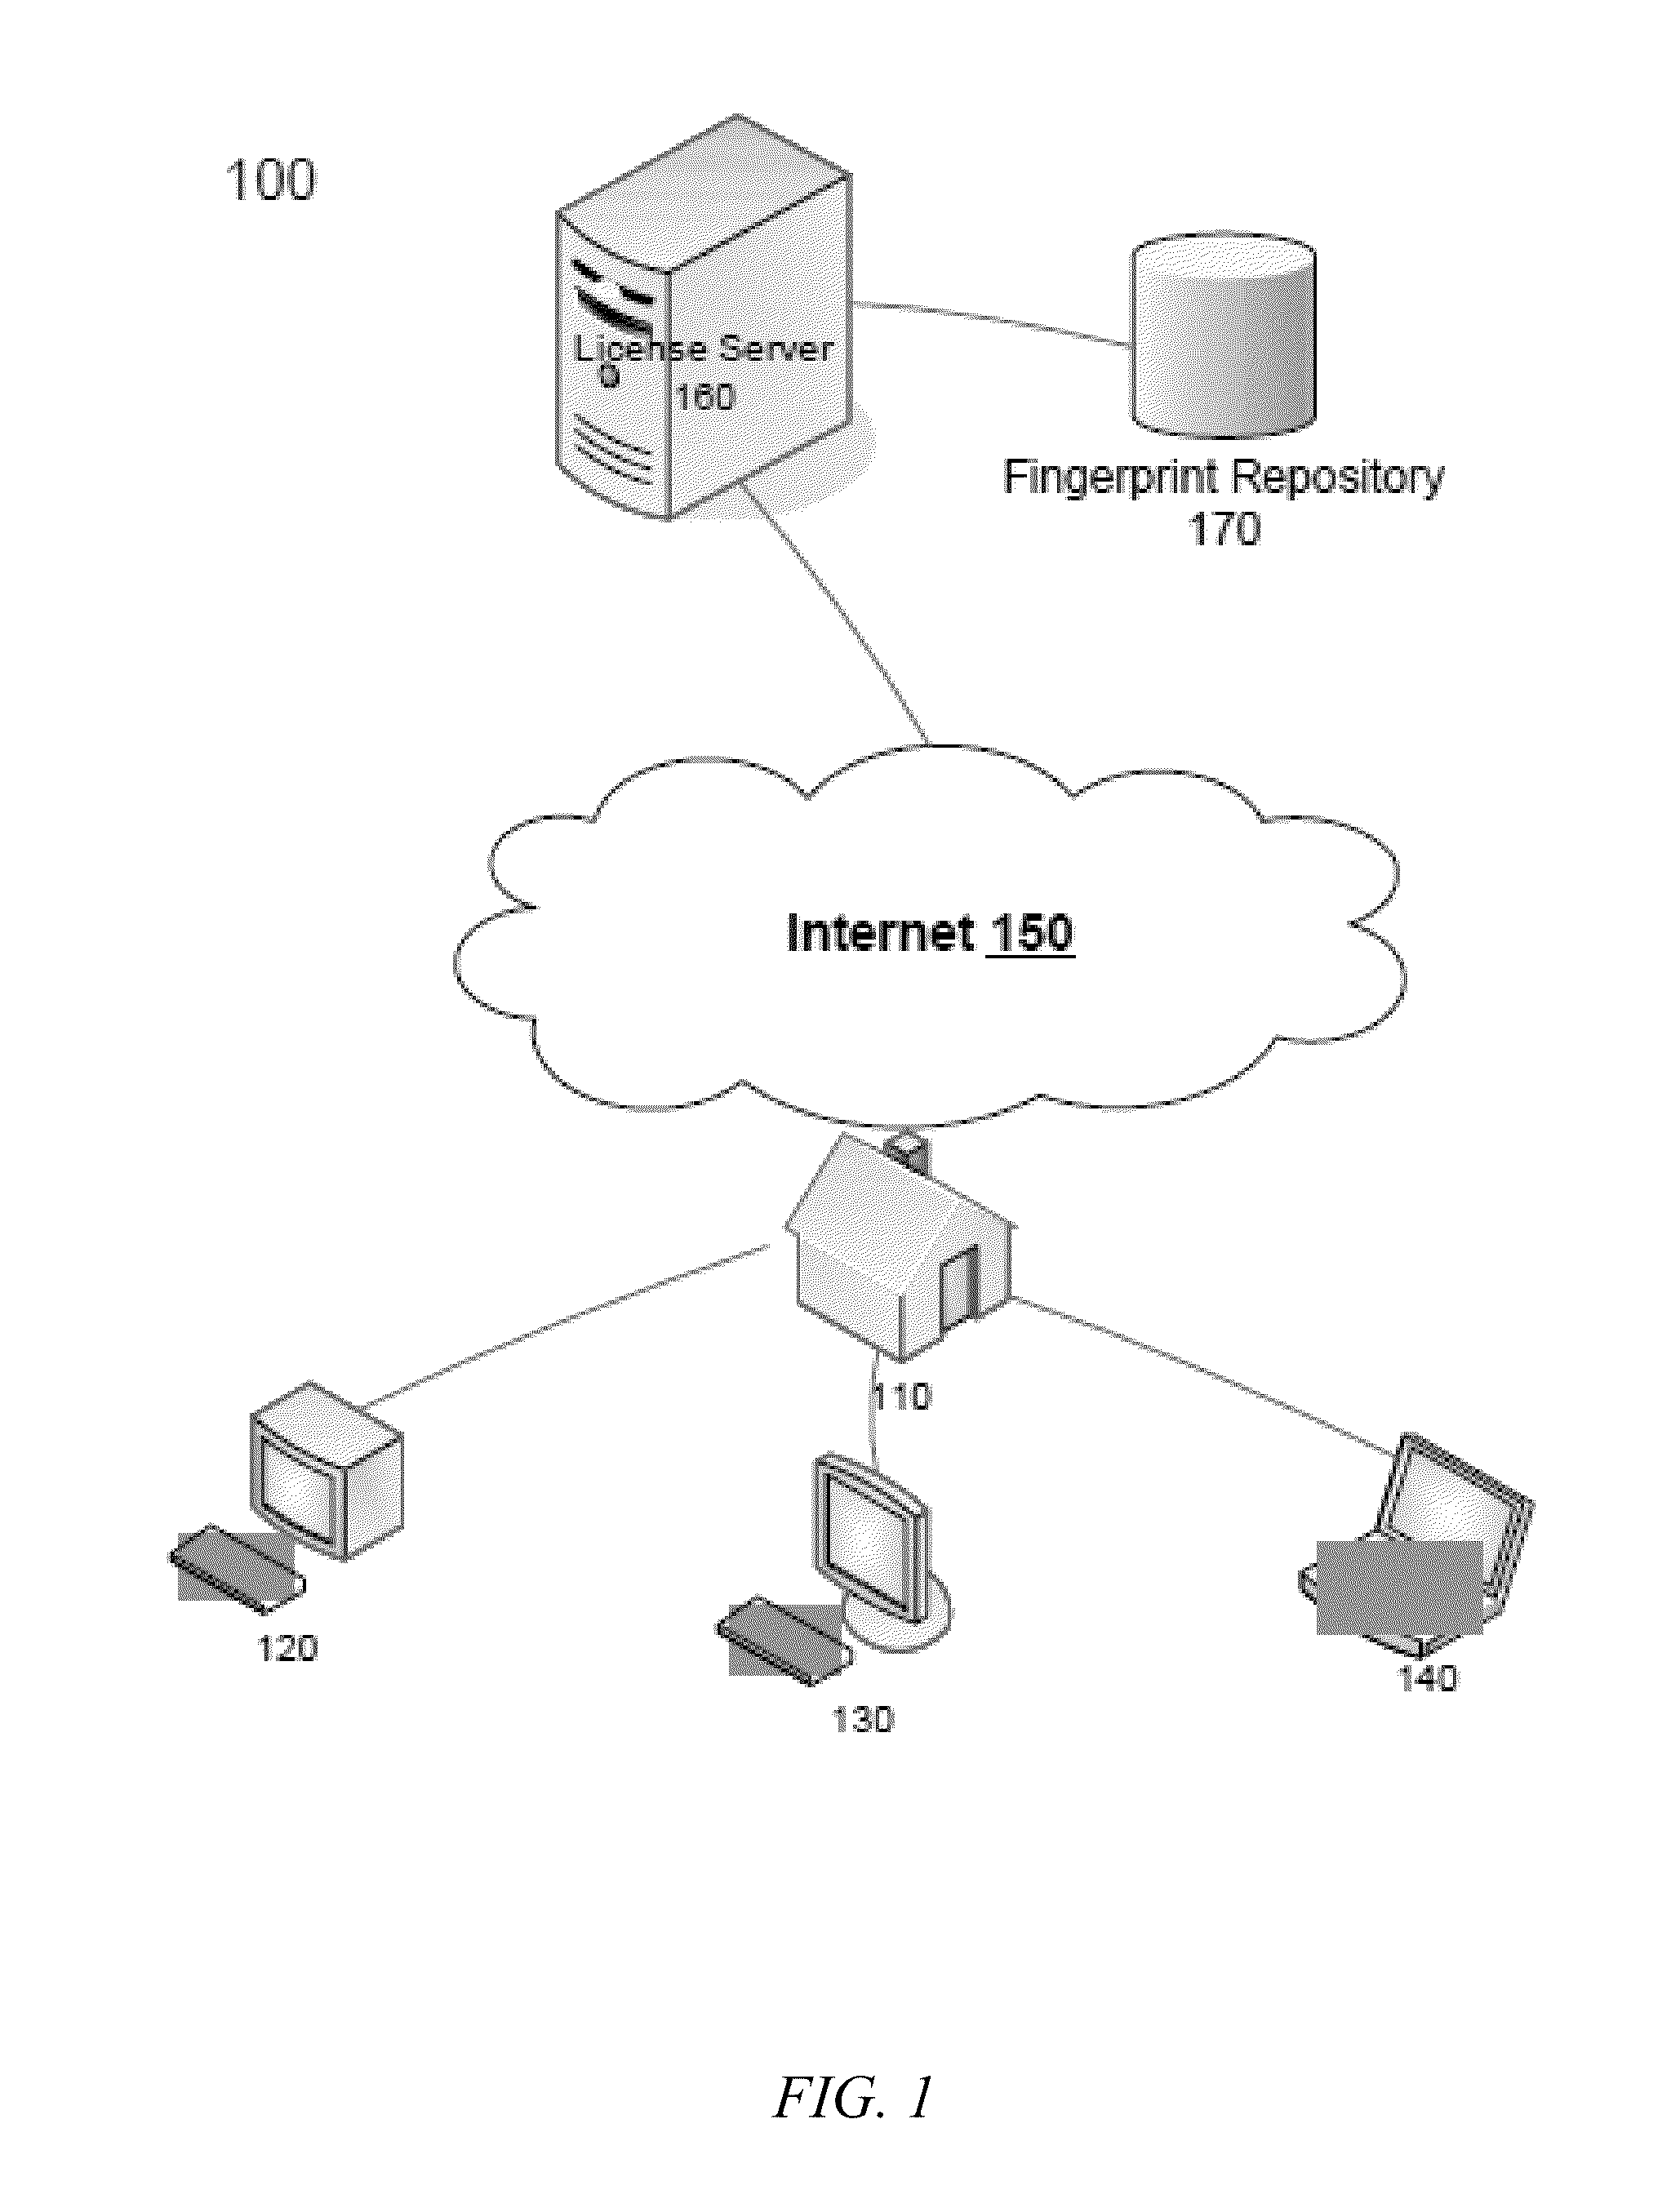 Systems and Methods for Determining Authorization to Operate Licensed Software Based on a Client Device Fingerprint